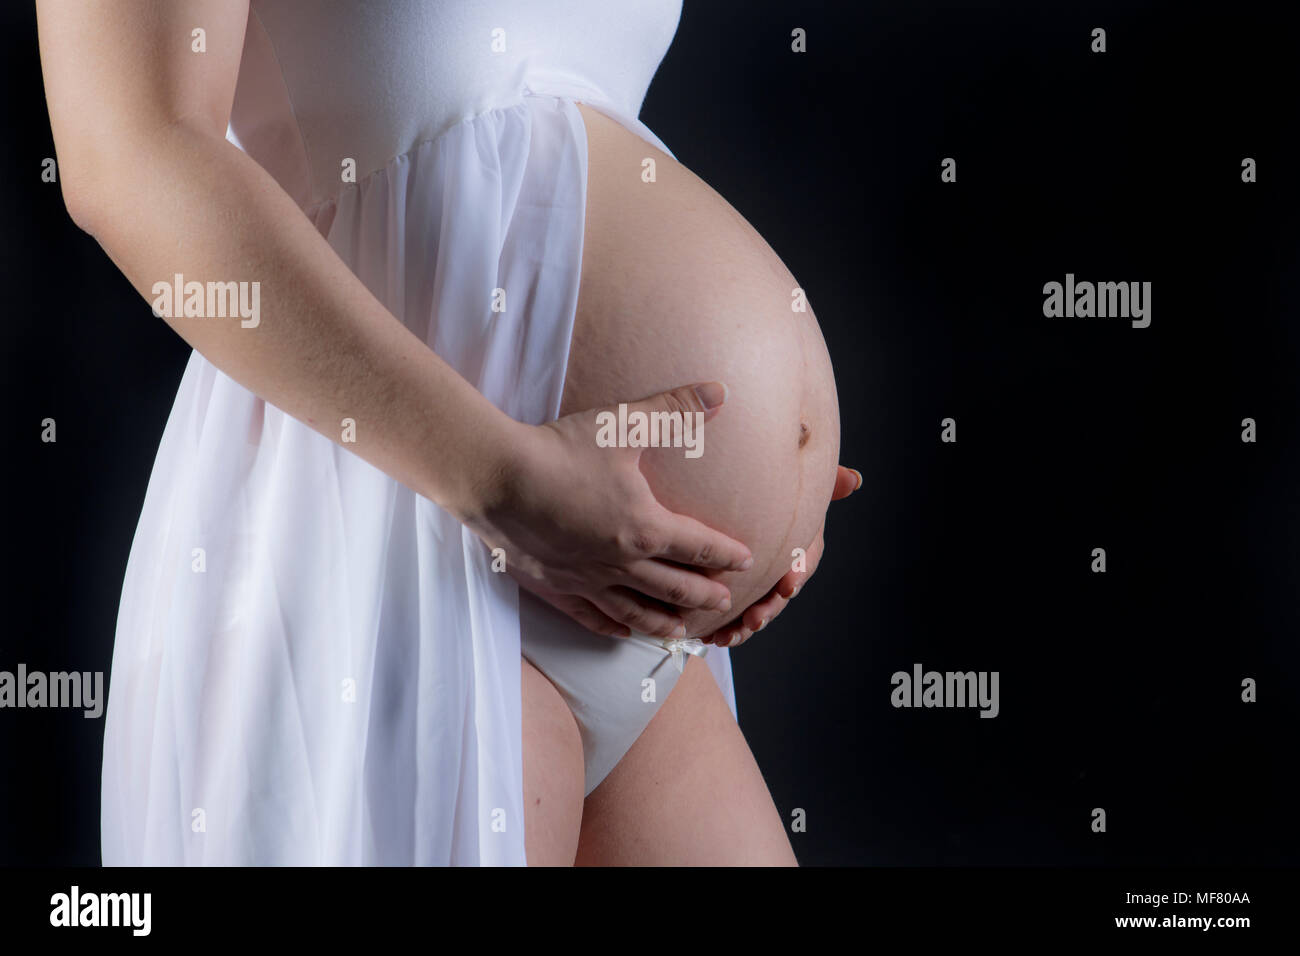 pregnancy, days of a new life, love family, new start Stock Photo